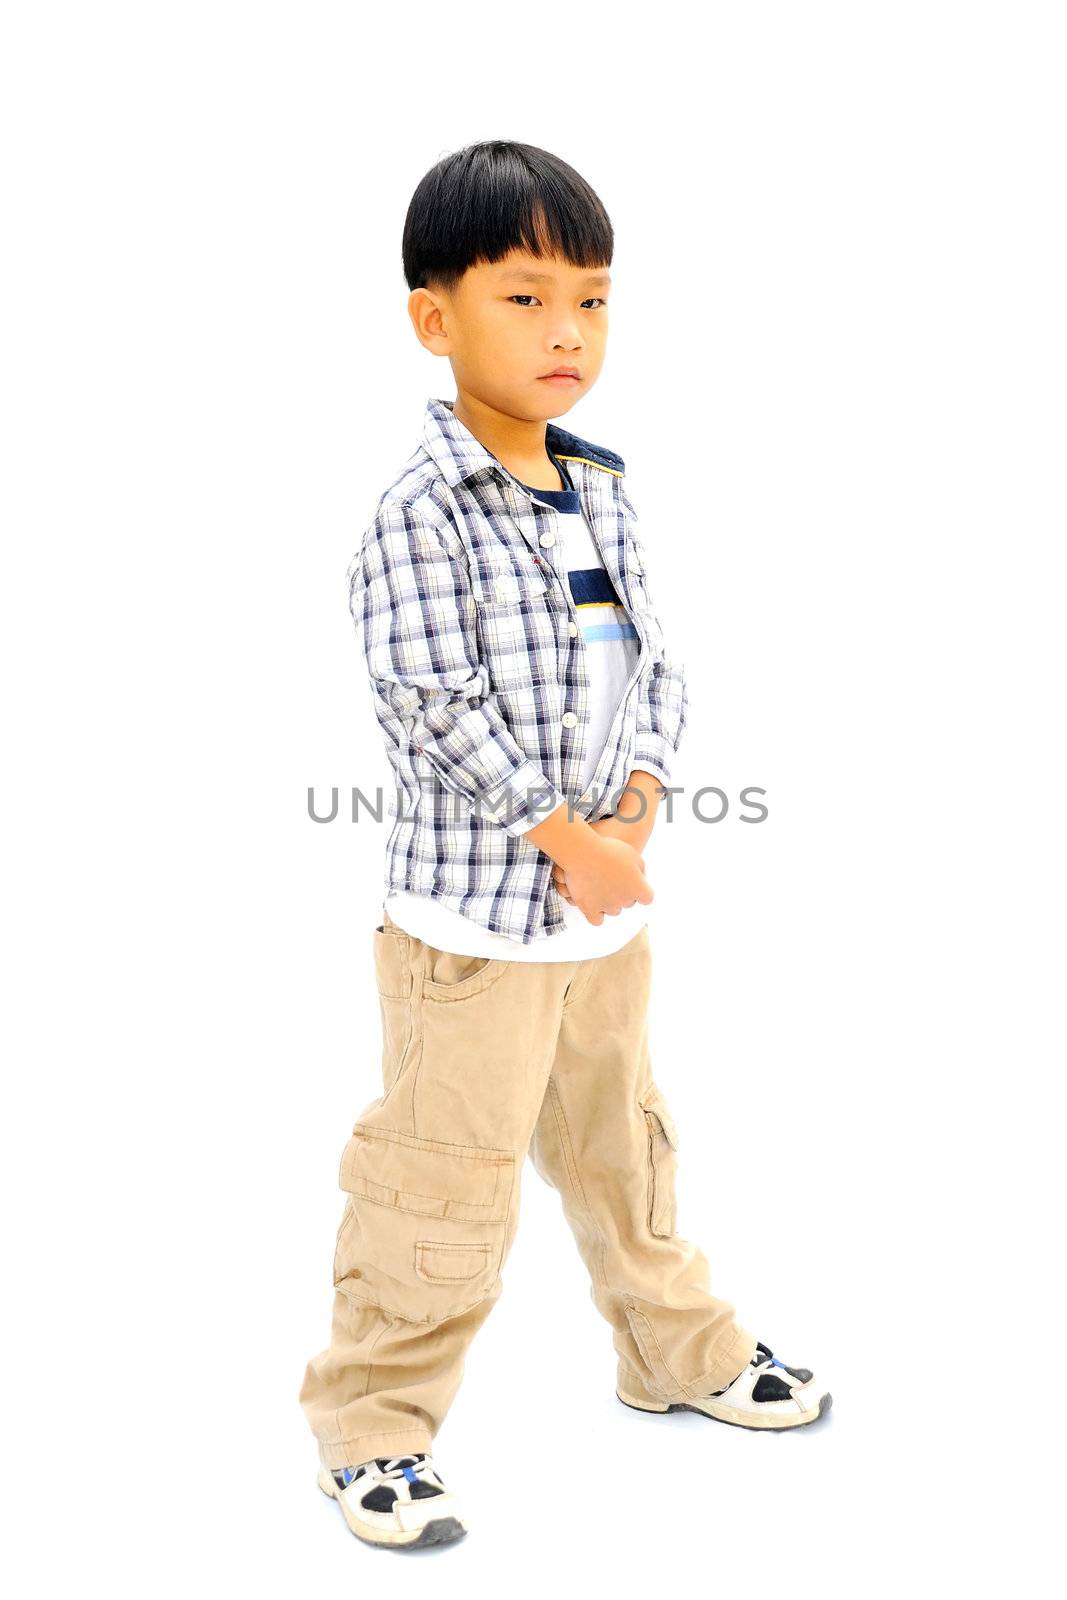 Asian little boy with isolated on white background by Yuri2012